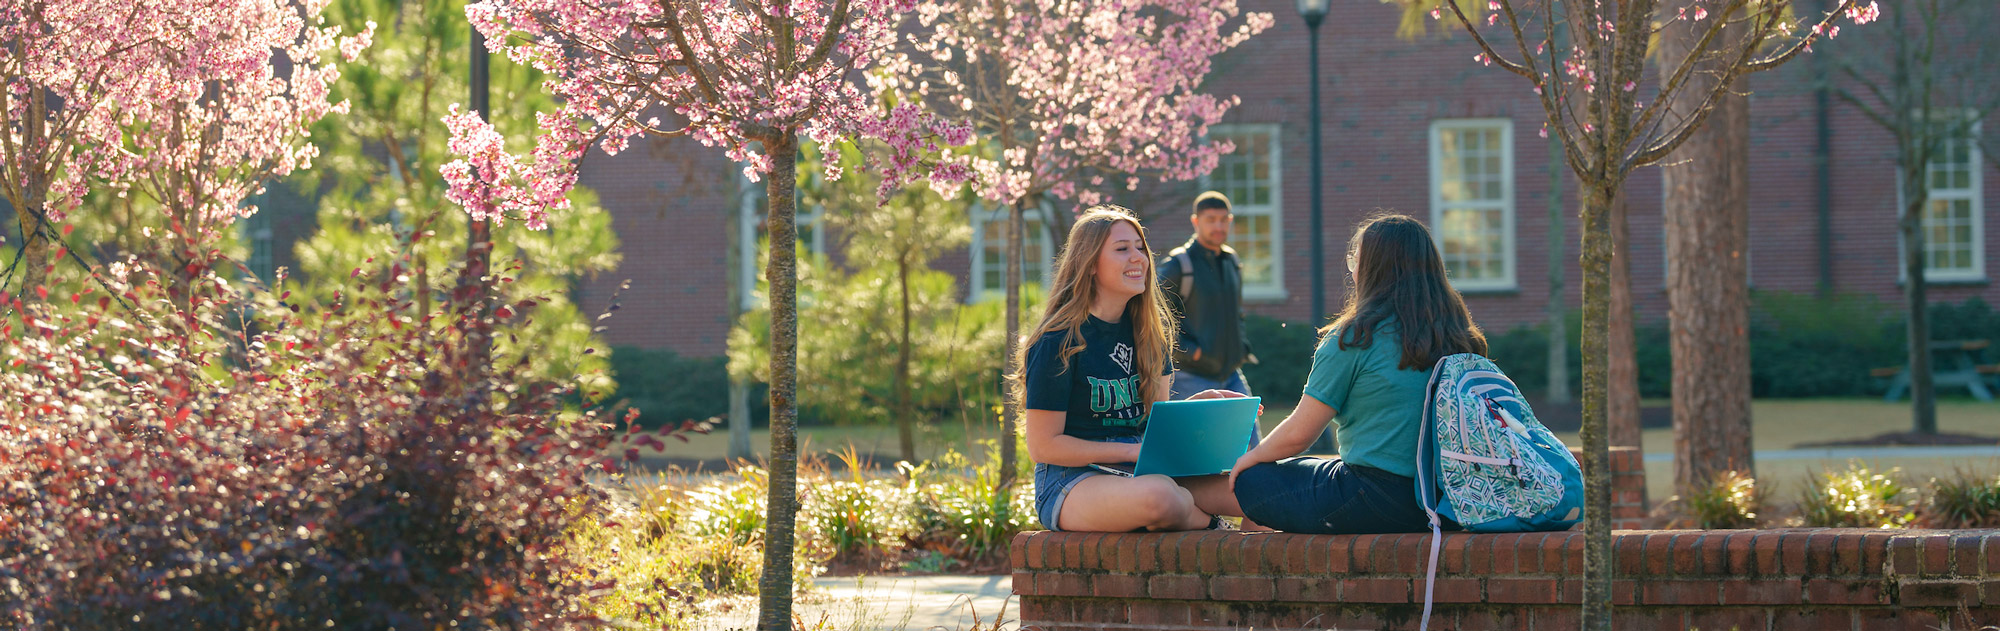 Two students sitting outside during the spring time with a teal laptop.